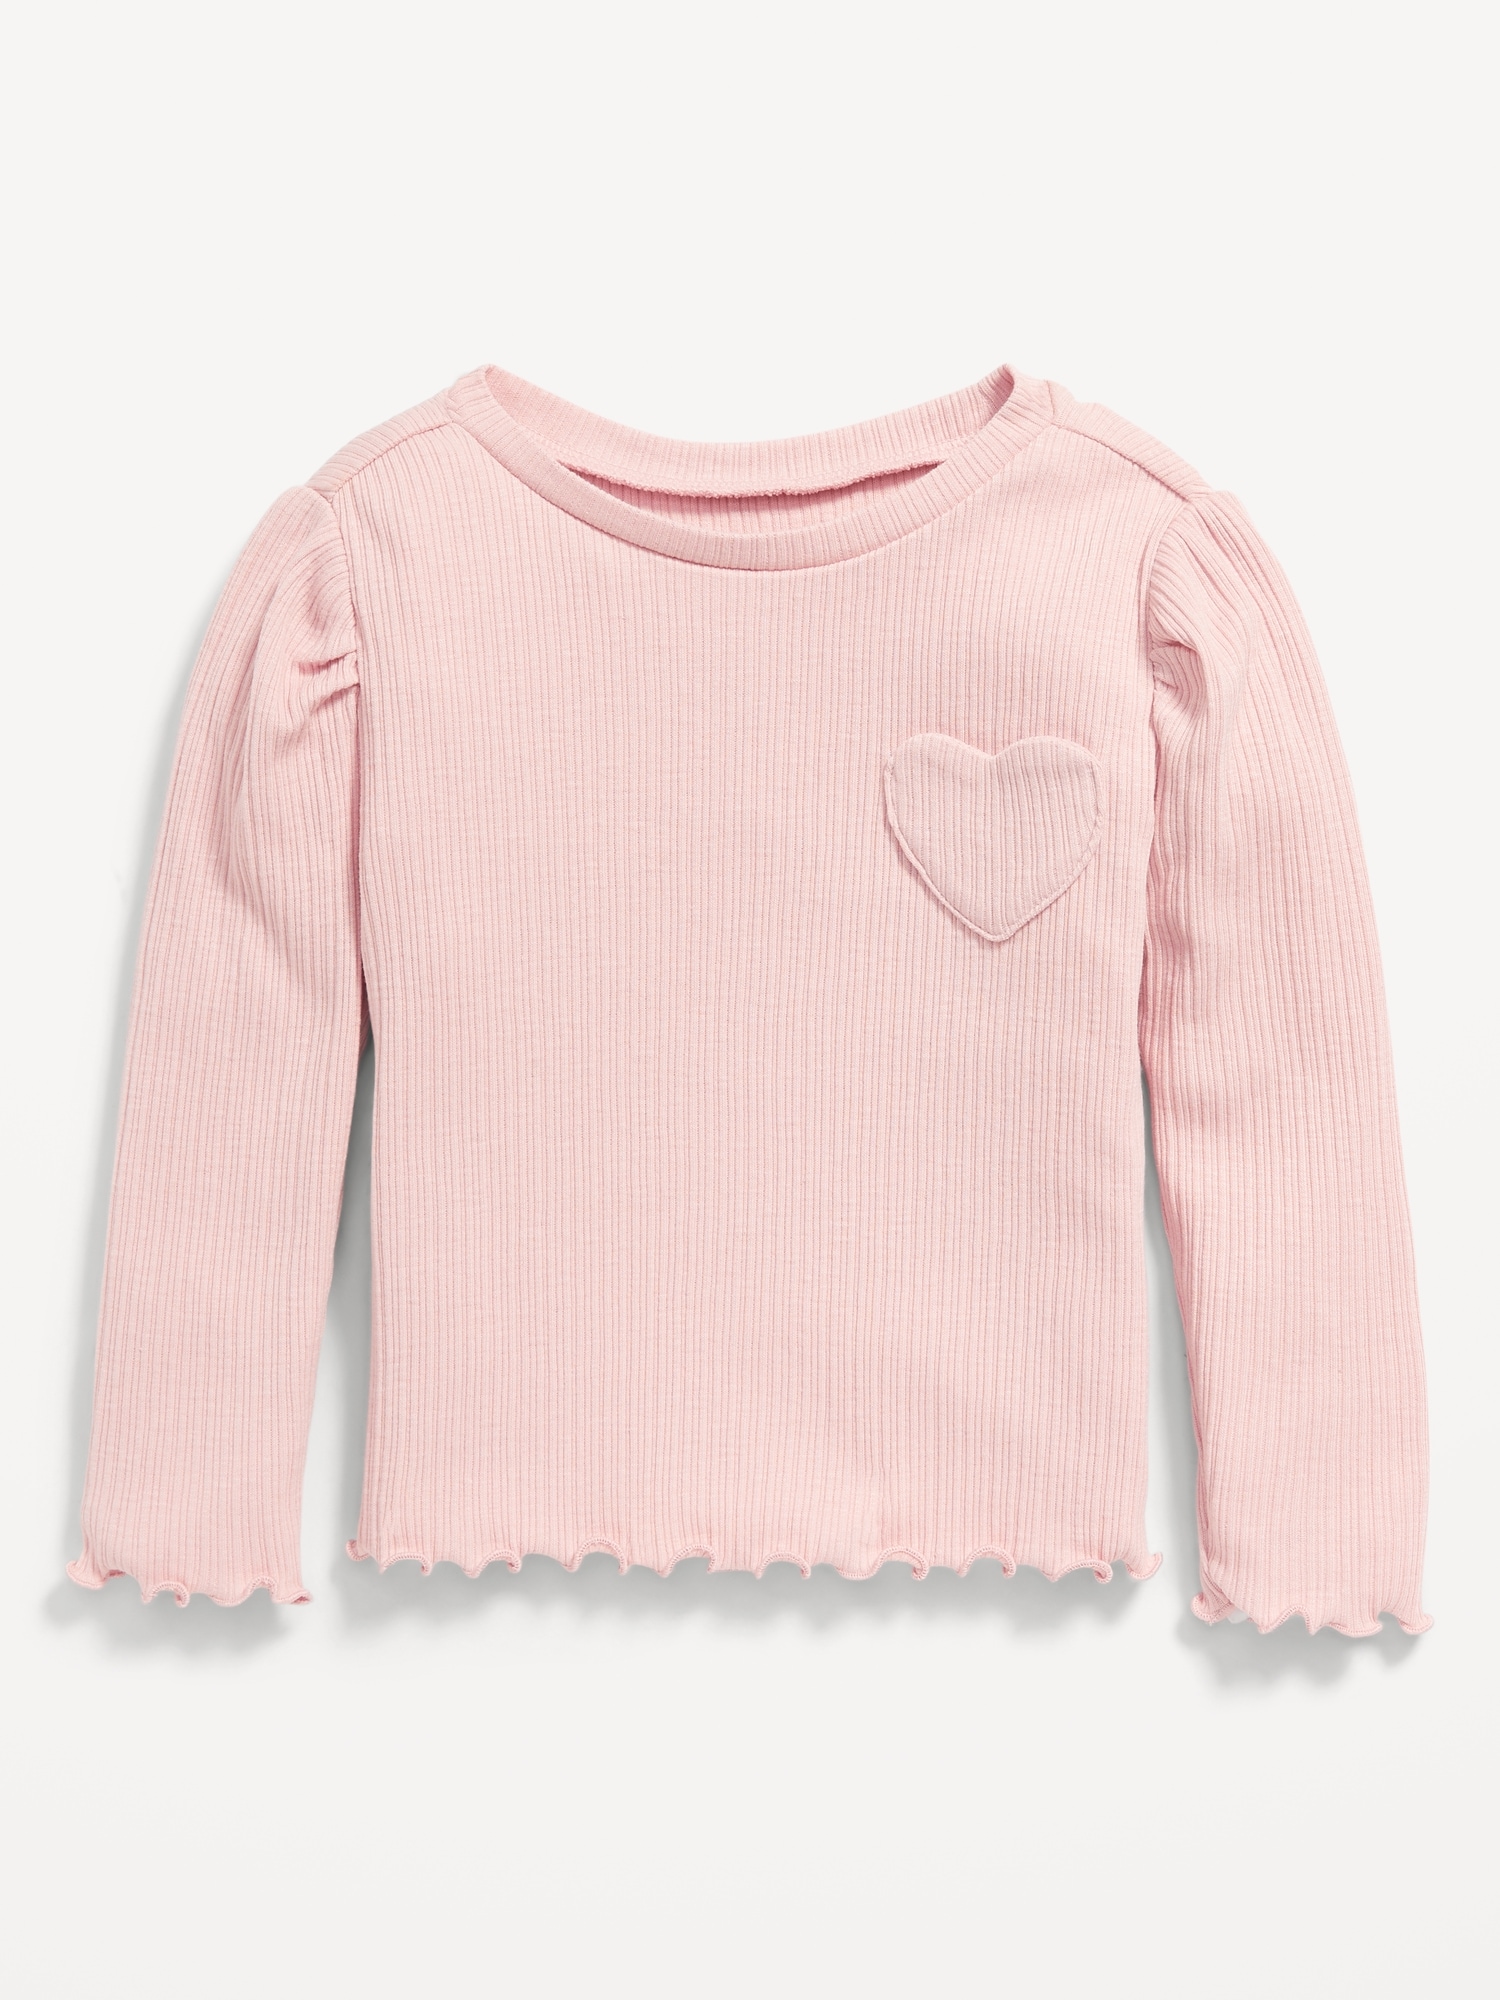 Long Puff-Sleeve Embroidered Heart T-Shirt for Toddler Girls